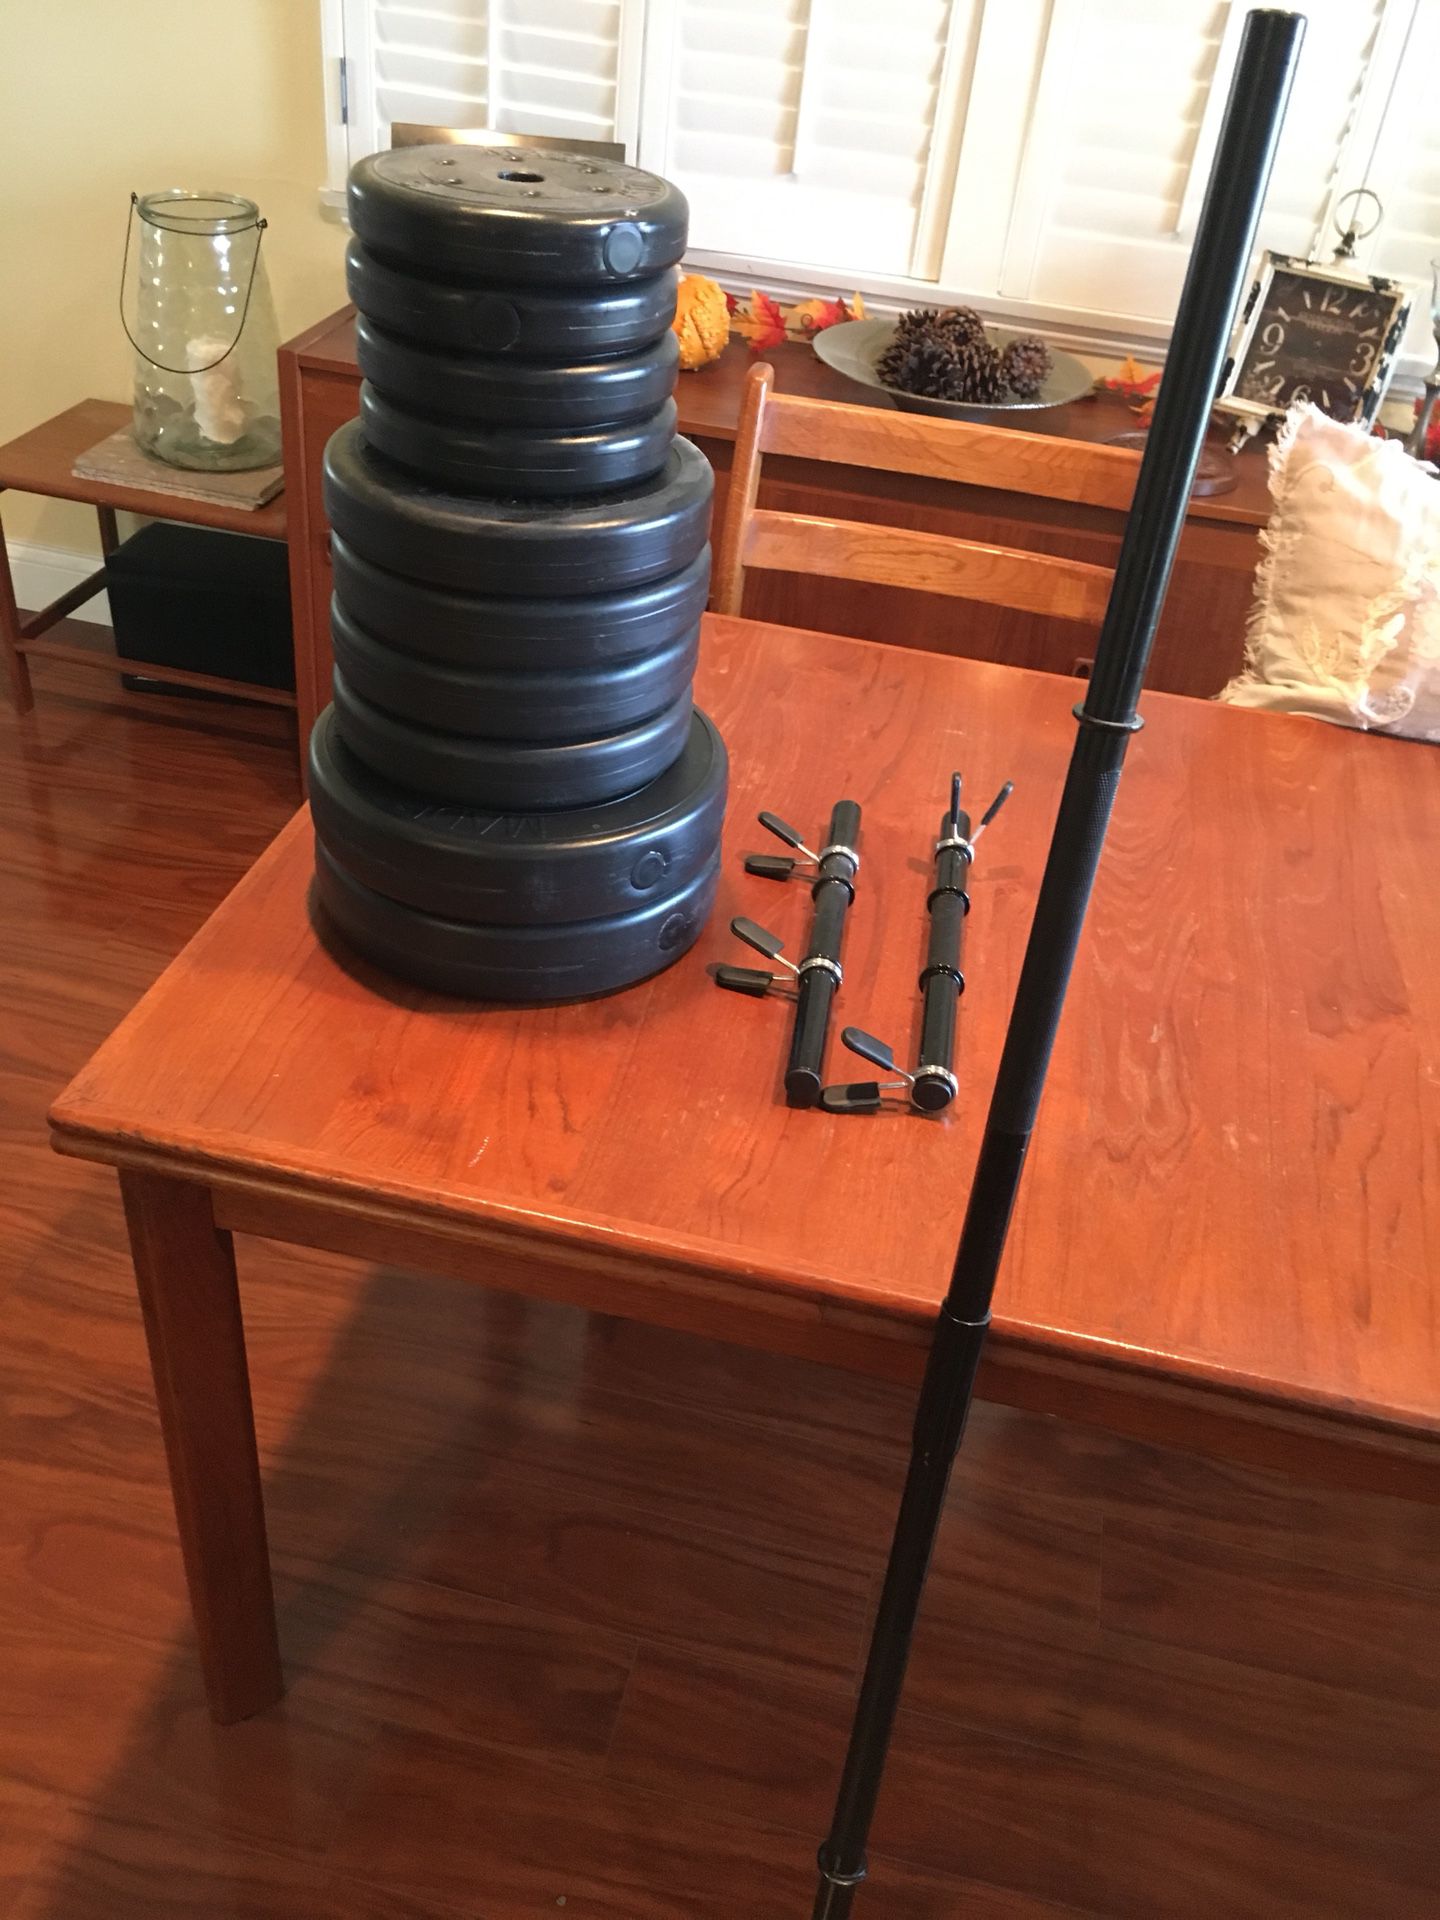 Weights and dumbbells/barbell set